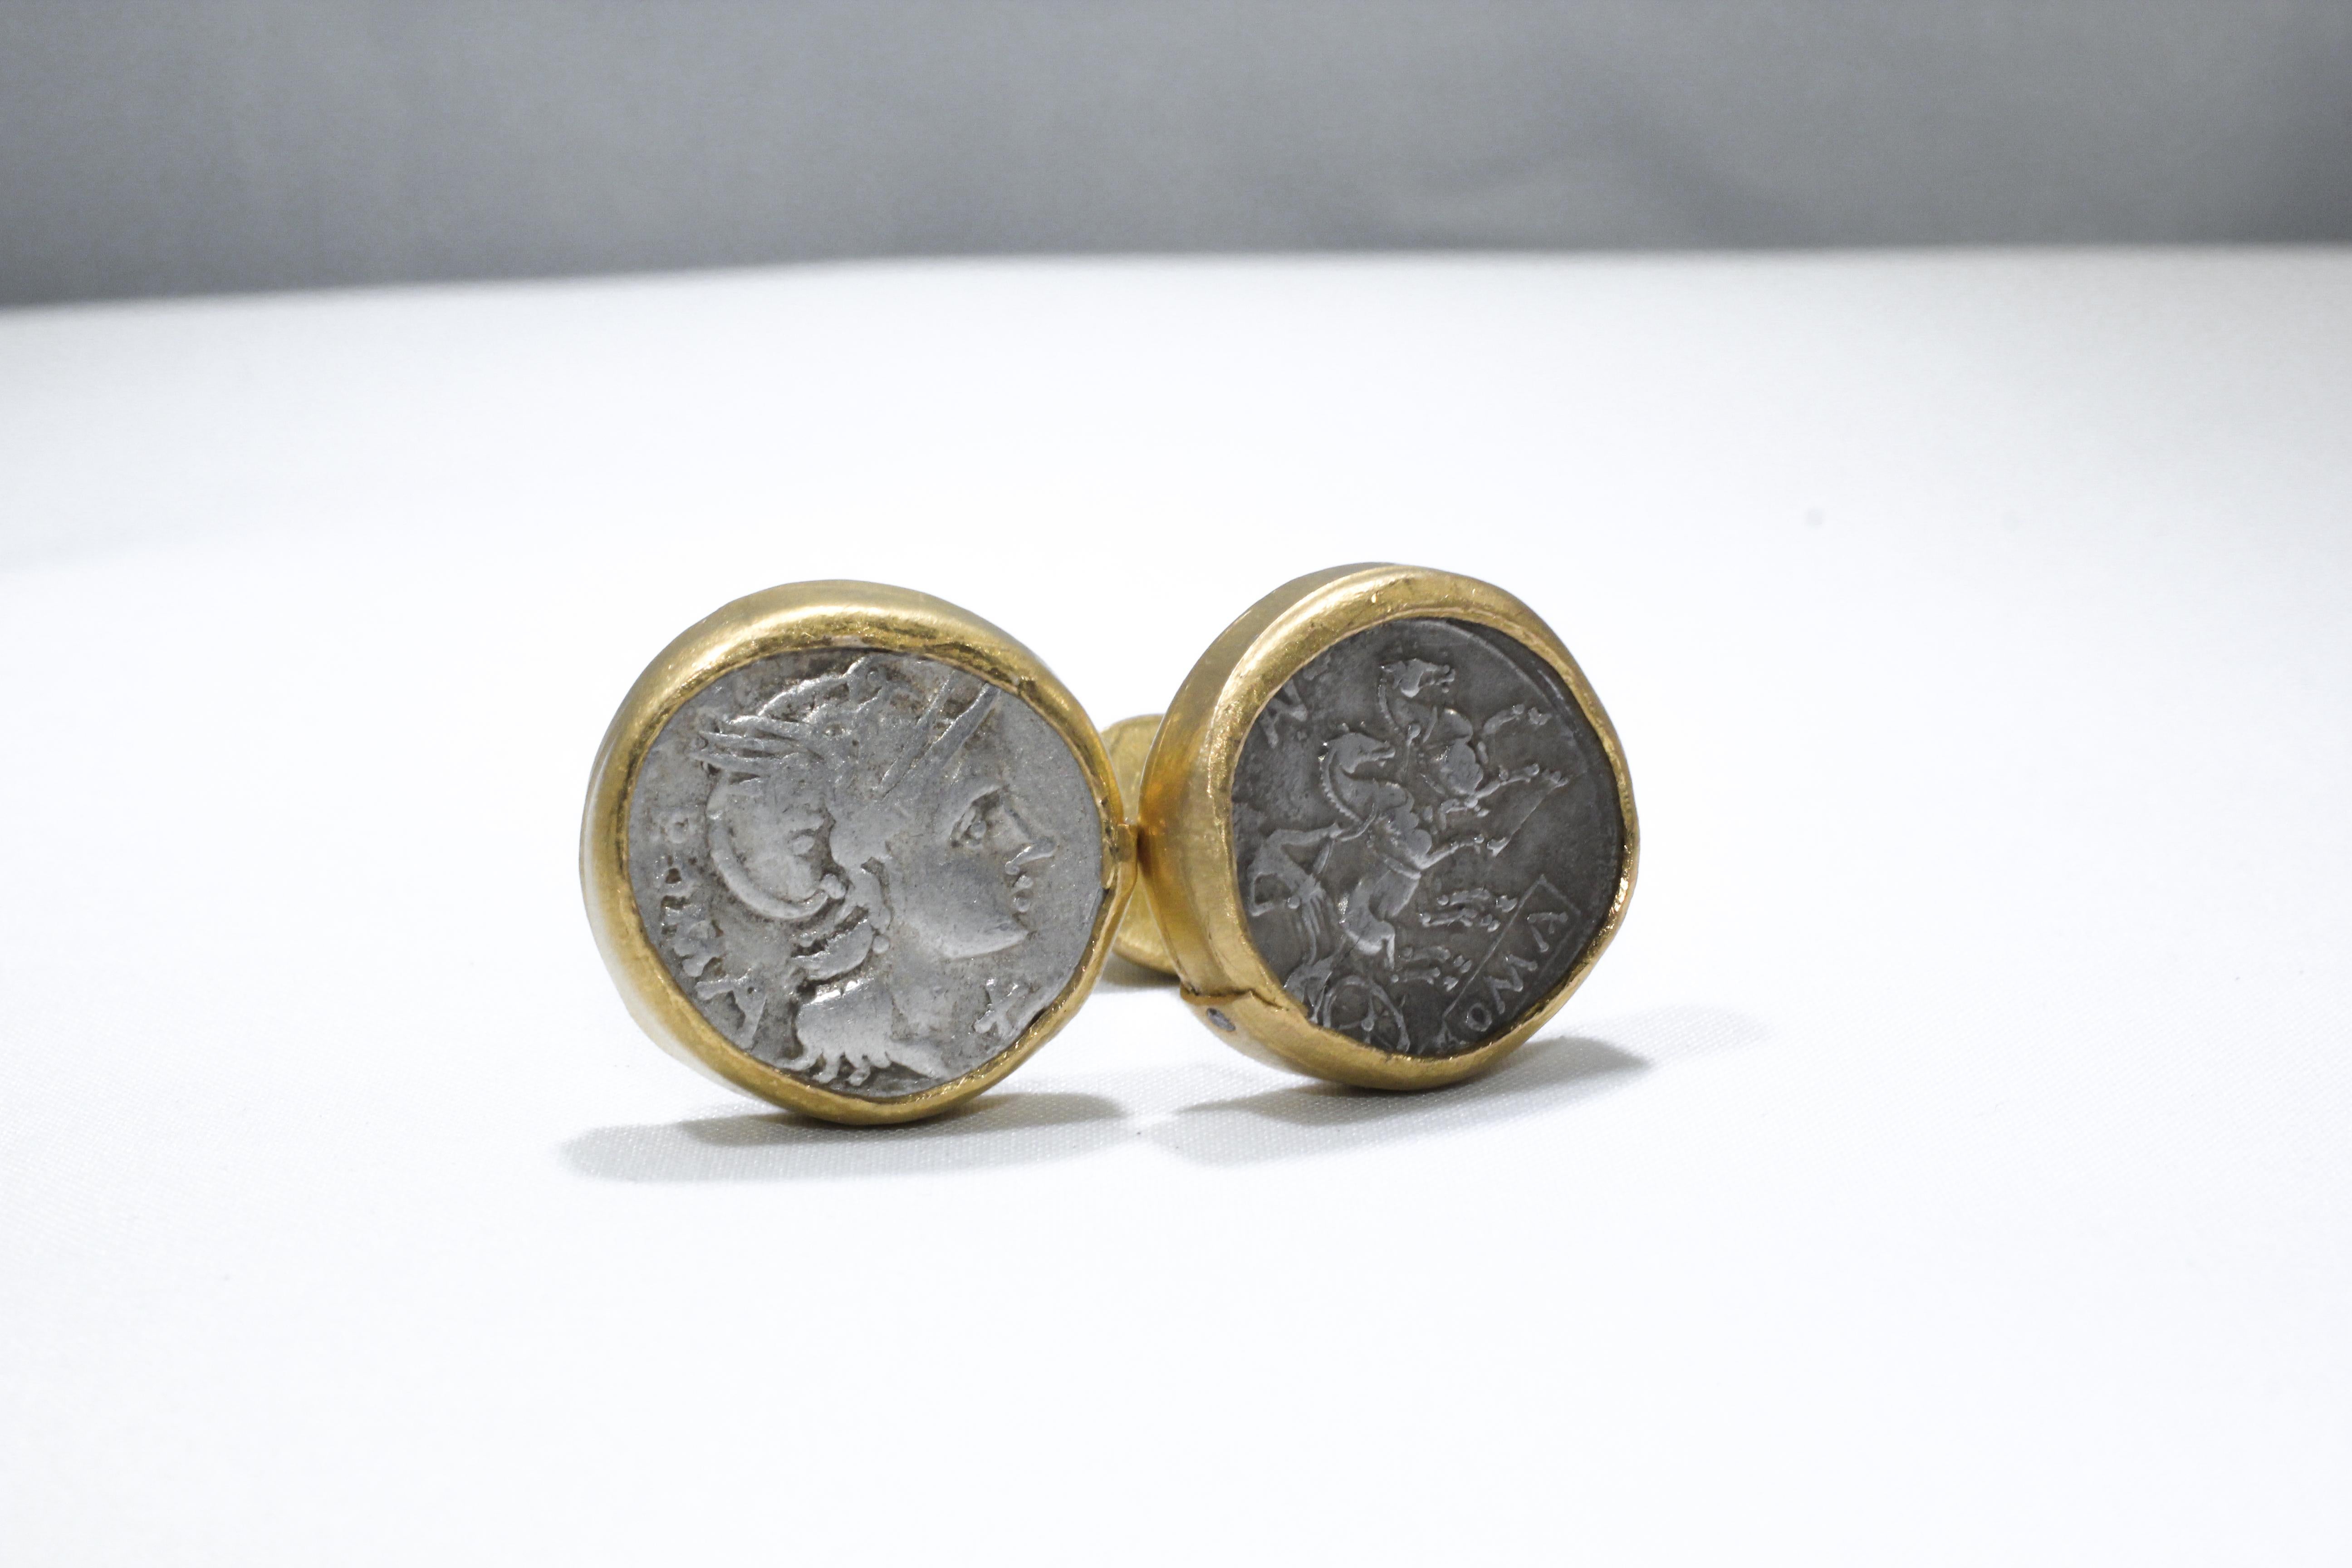 Coin cufflinks. Antique 2nd Cent BC Roman coins set in 21k gold bezels, styled with small diamond accents. Contemporary jewelry design by AB Jewelry NYC.

Bold and masculine while inspired by history, these elegant cufflinks are created today for a